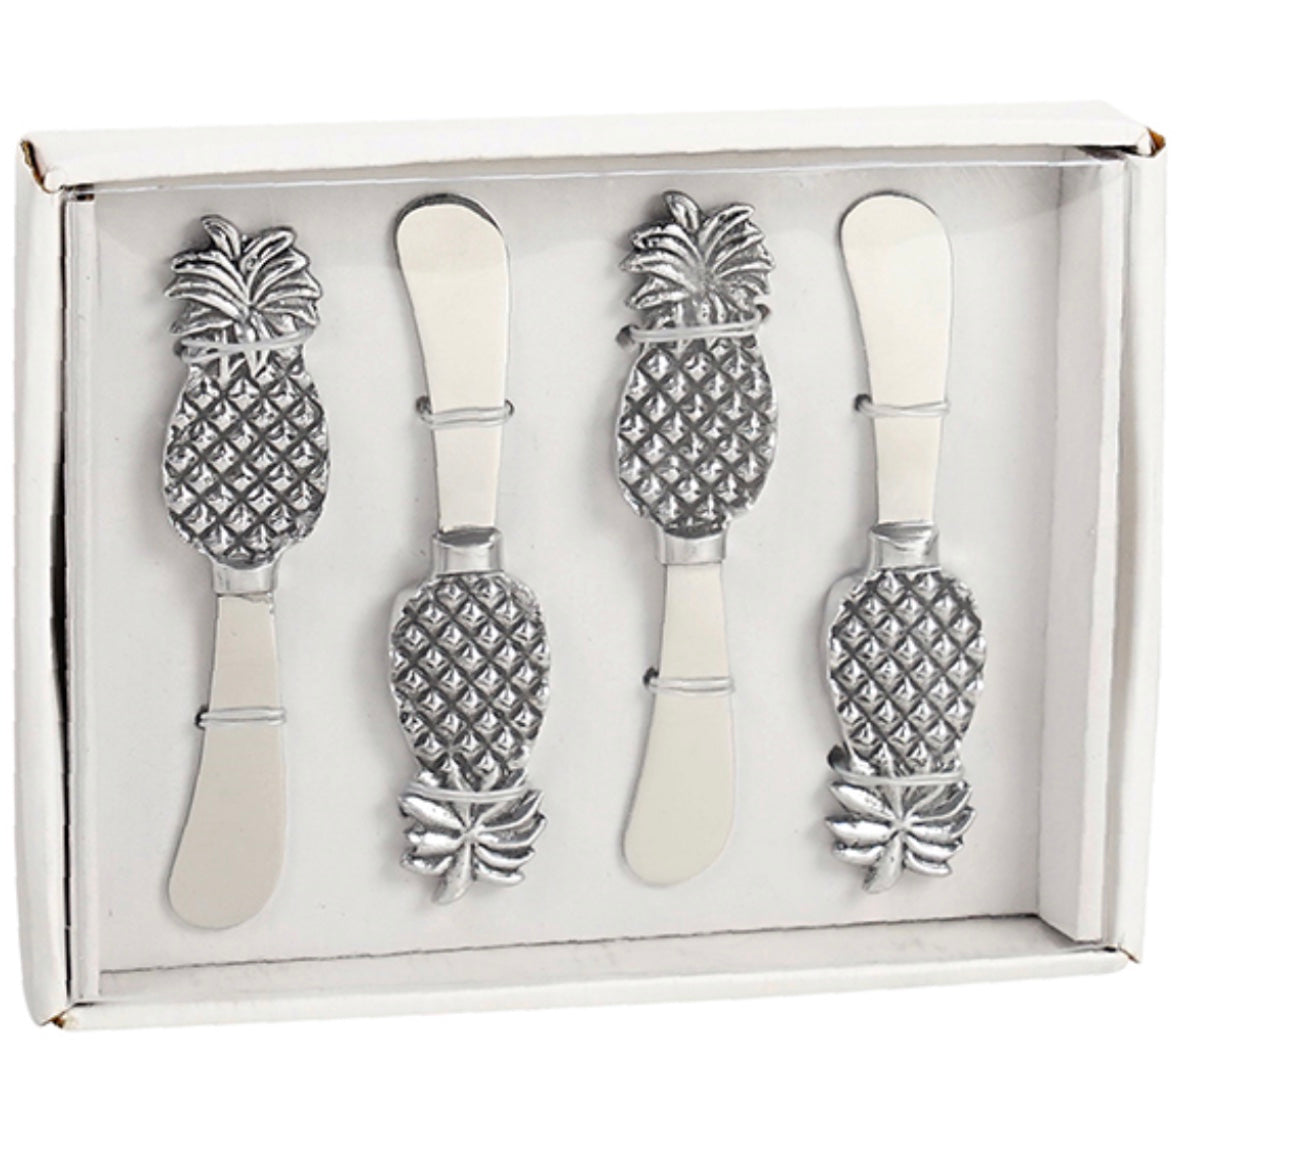 S/S SILVER PINEAPPLE CHEESE SET 4